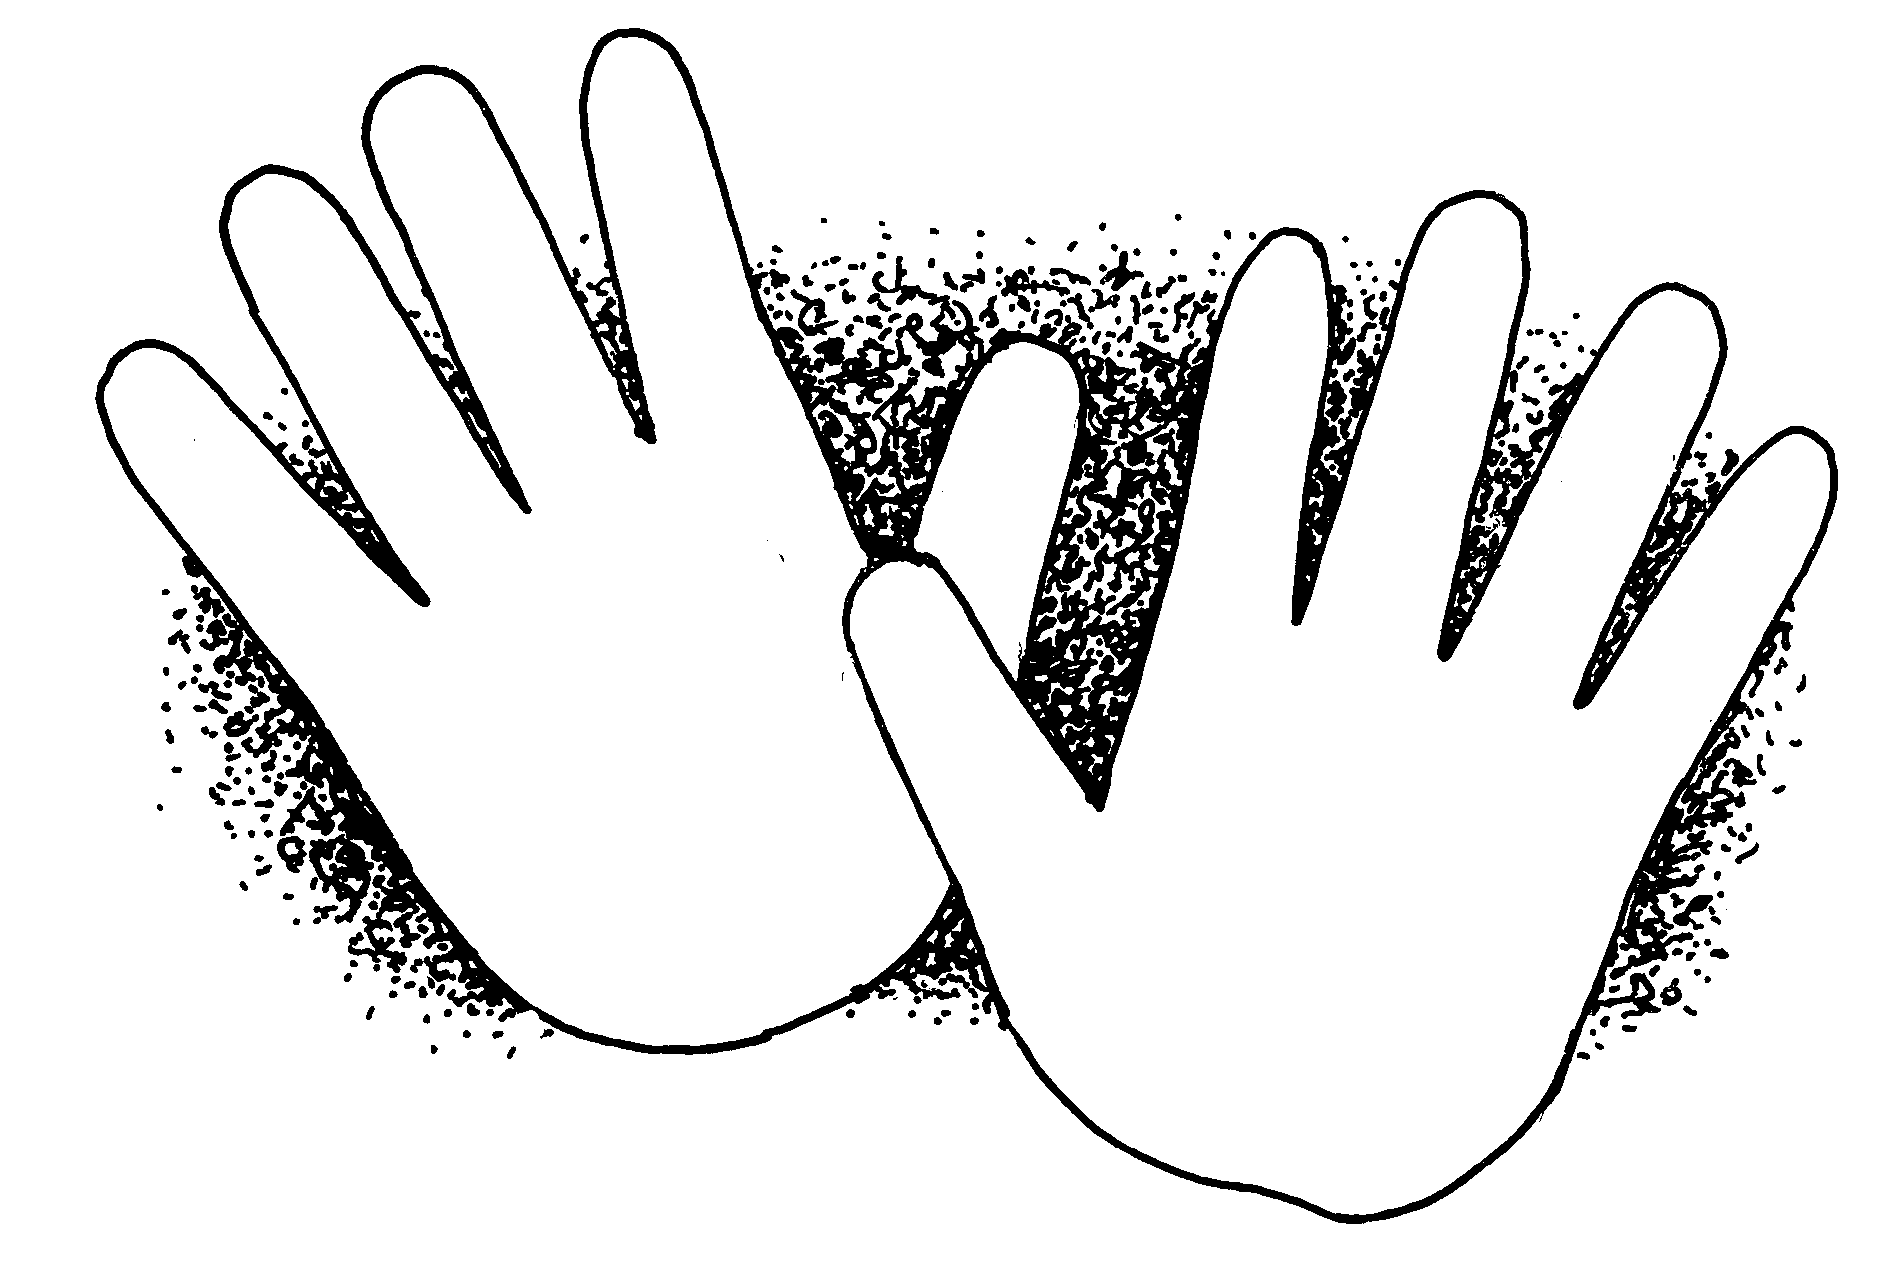 Helping Hands Black And White Clipart